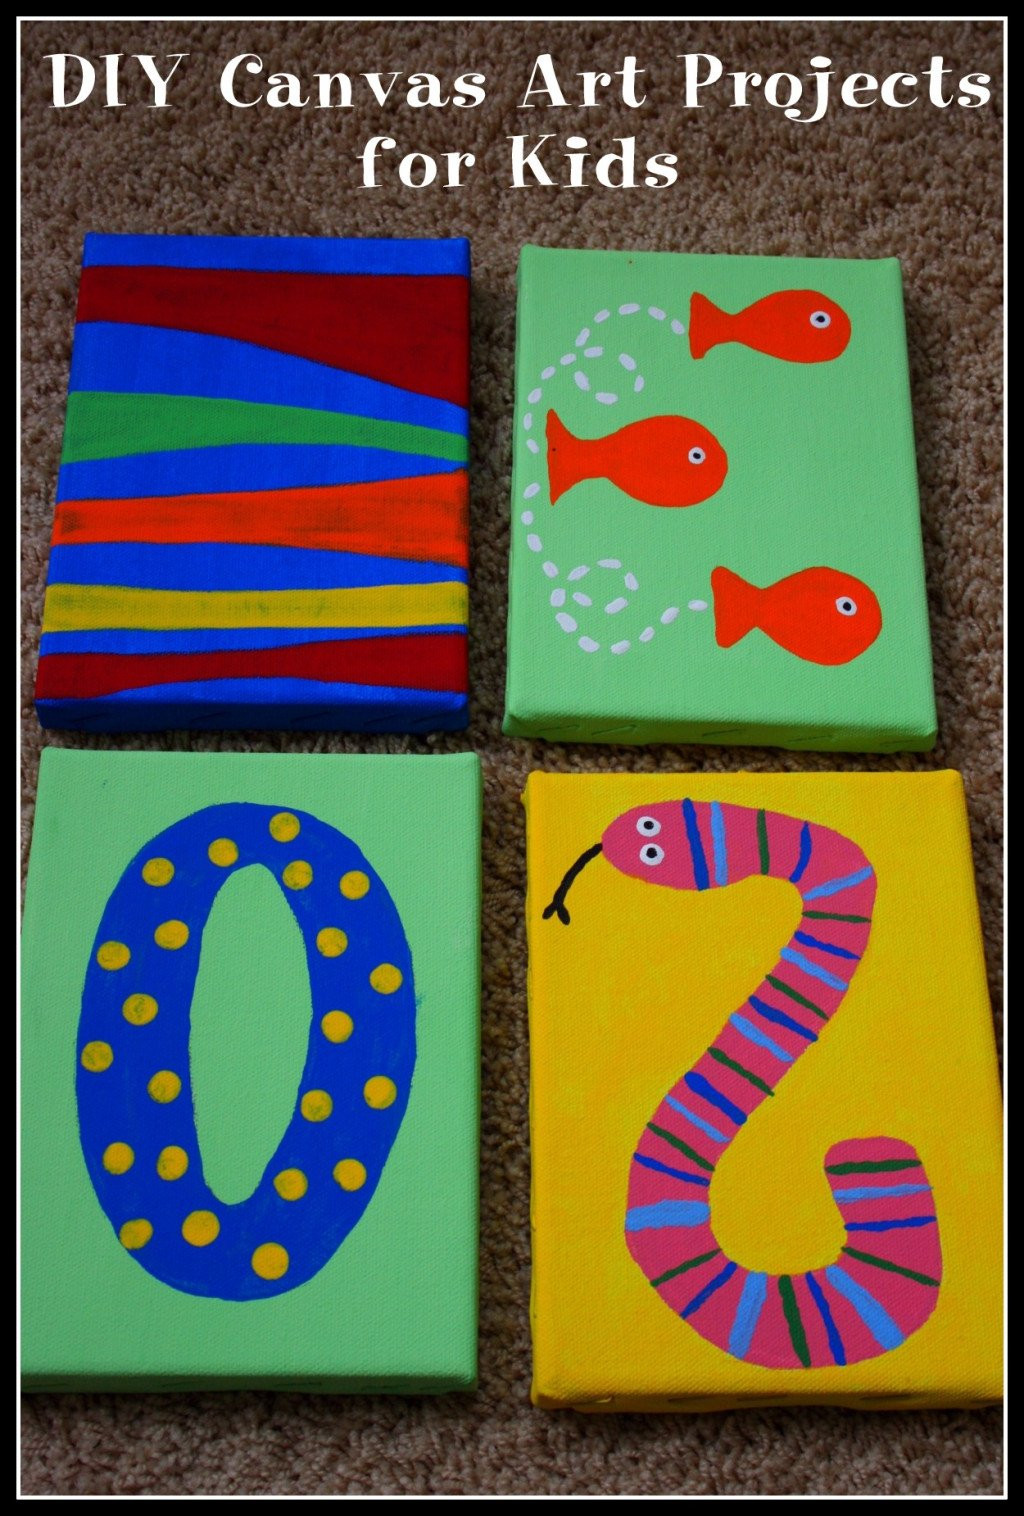 DIY Painting For Kids
 DIY Canvas Art Projects for Kids